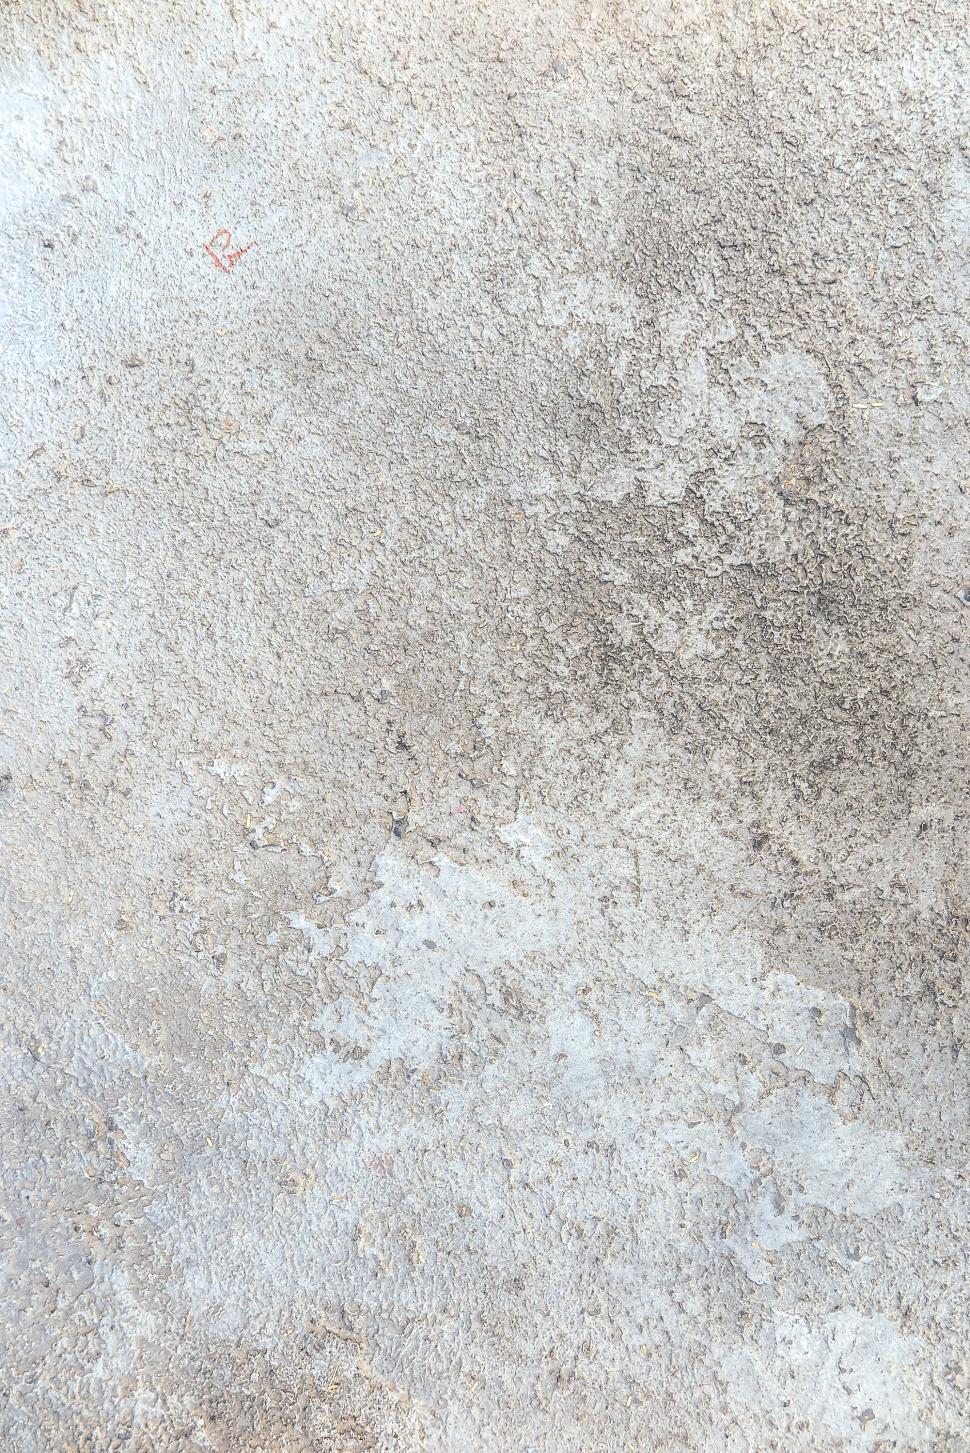 Free Image of Grungy white texture 